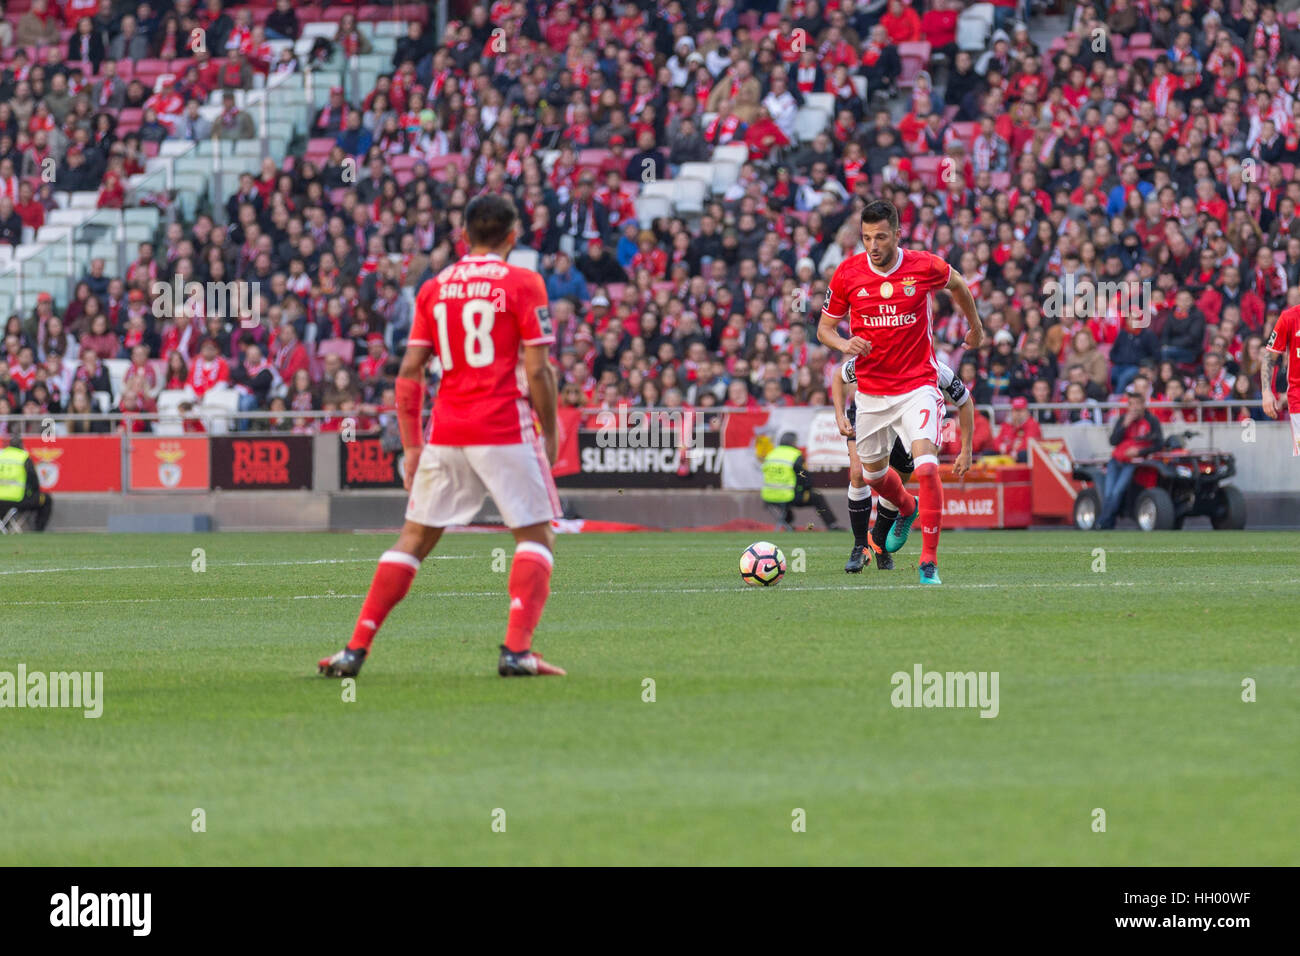 Lisbon, Portugal. 14th January, 2017.Benfica's midfielder from Greece Andreas Samaris (7) in action during the game SL Benfica v Boavista FC in Lisbon, Portugal. © Alexandre de Sousa/Alamy Live News Stock Photo